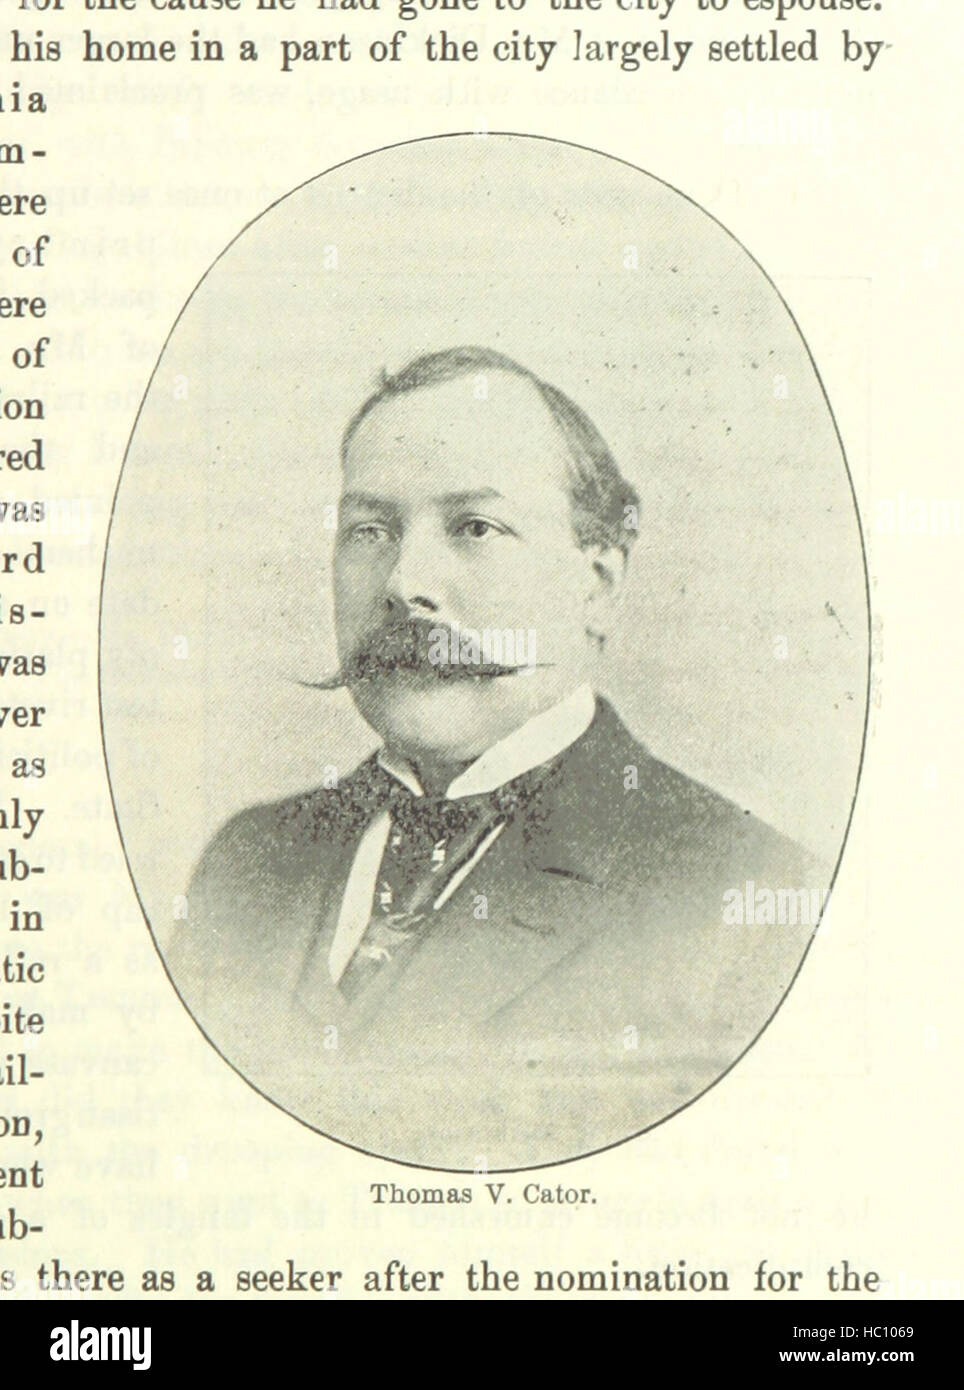 Image taken from page 195 of 'Modern Battles of Trenton. Being a history of New Jersey's politics ... from ... 1868 to ... 1894' Image taken from page 195 of 'Modern Battles of Trenton Stock Photo